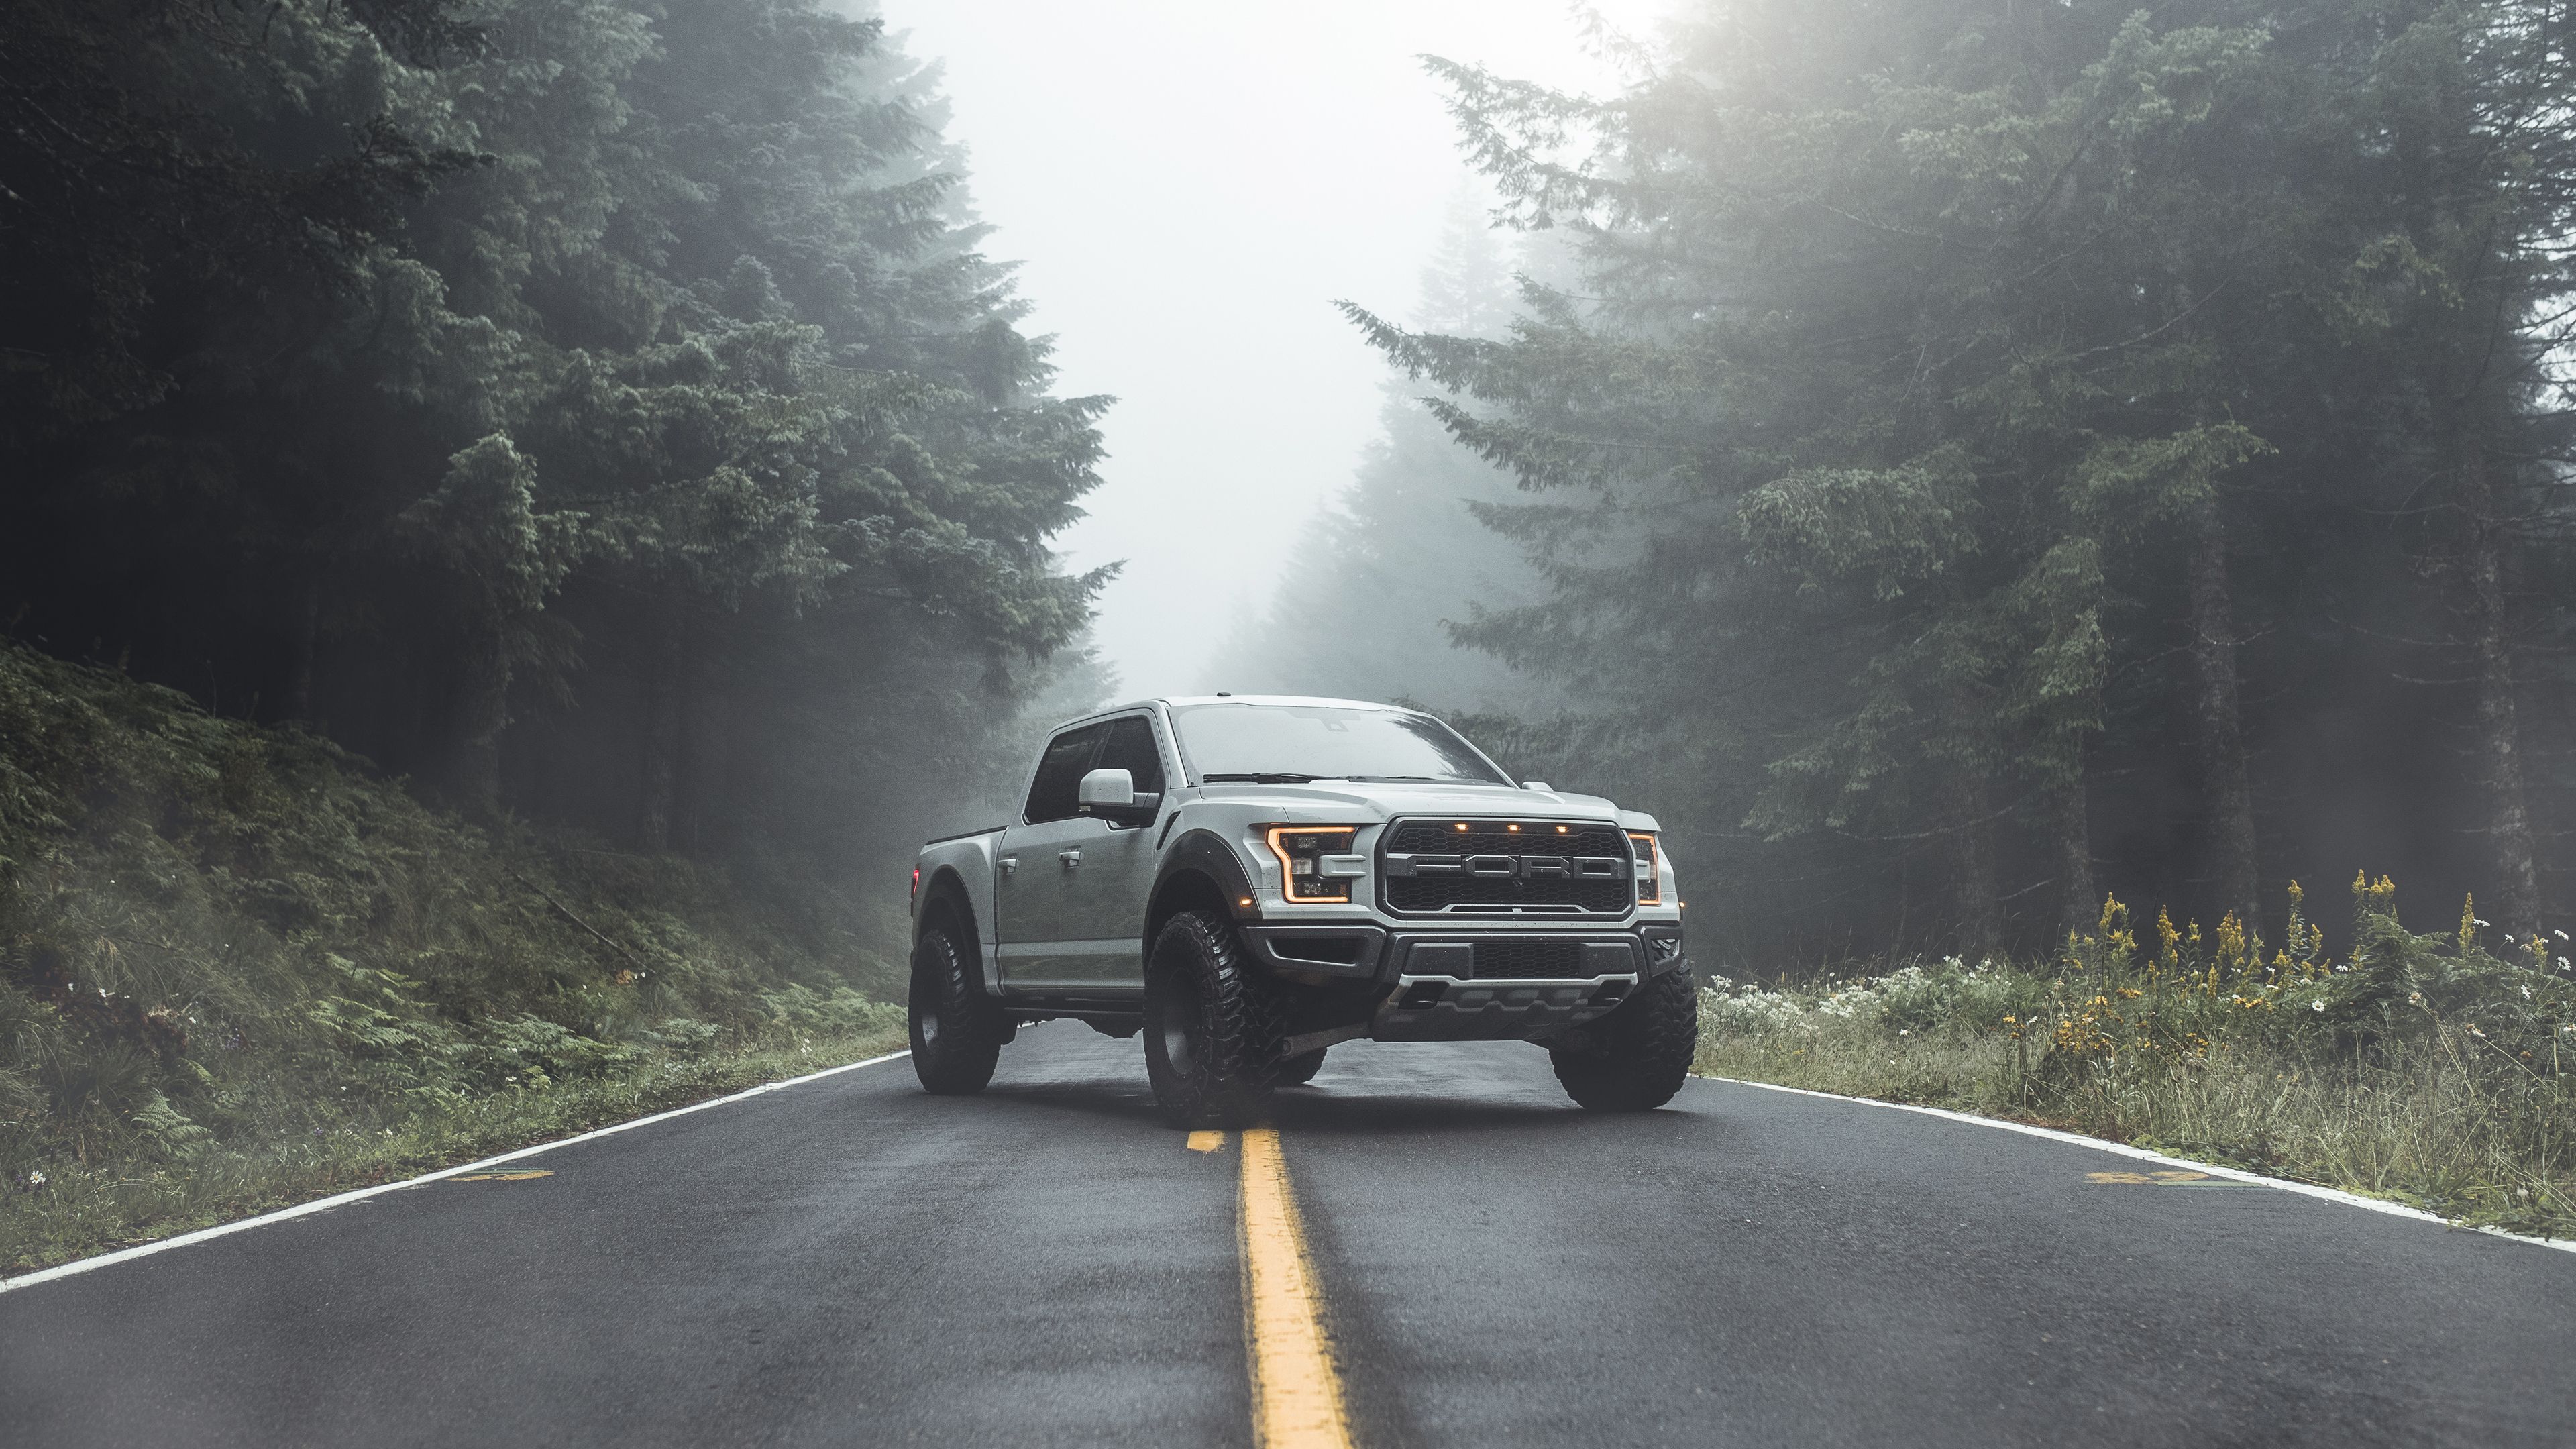 Ford Raptor 2019 Truck Wallpaper, Hd Wallpaper, Ford Wallpaper, Ford Raptor Wallpaper, Ford Ranger Rapto. Car Photography, Ford Raptor, Automotive Photography